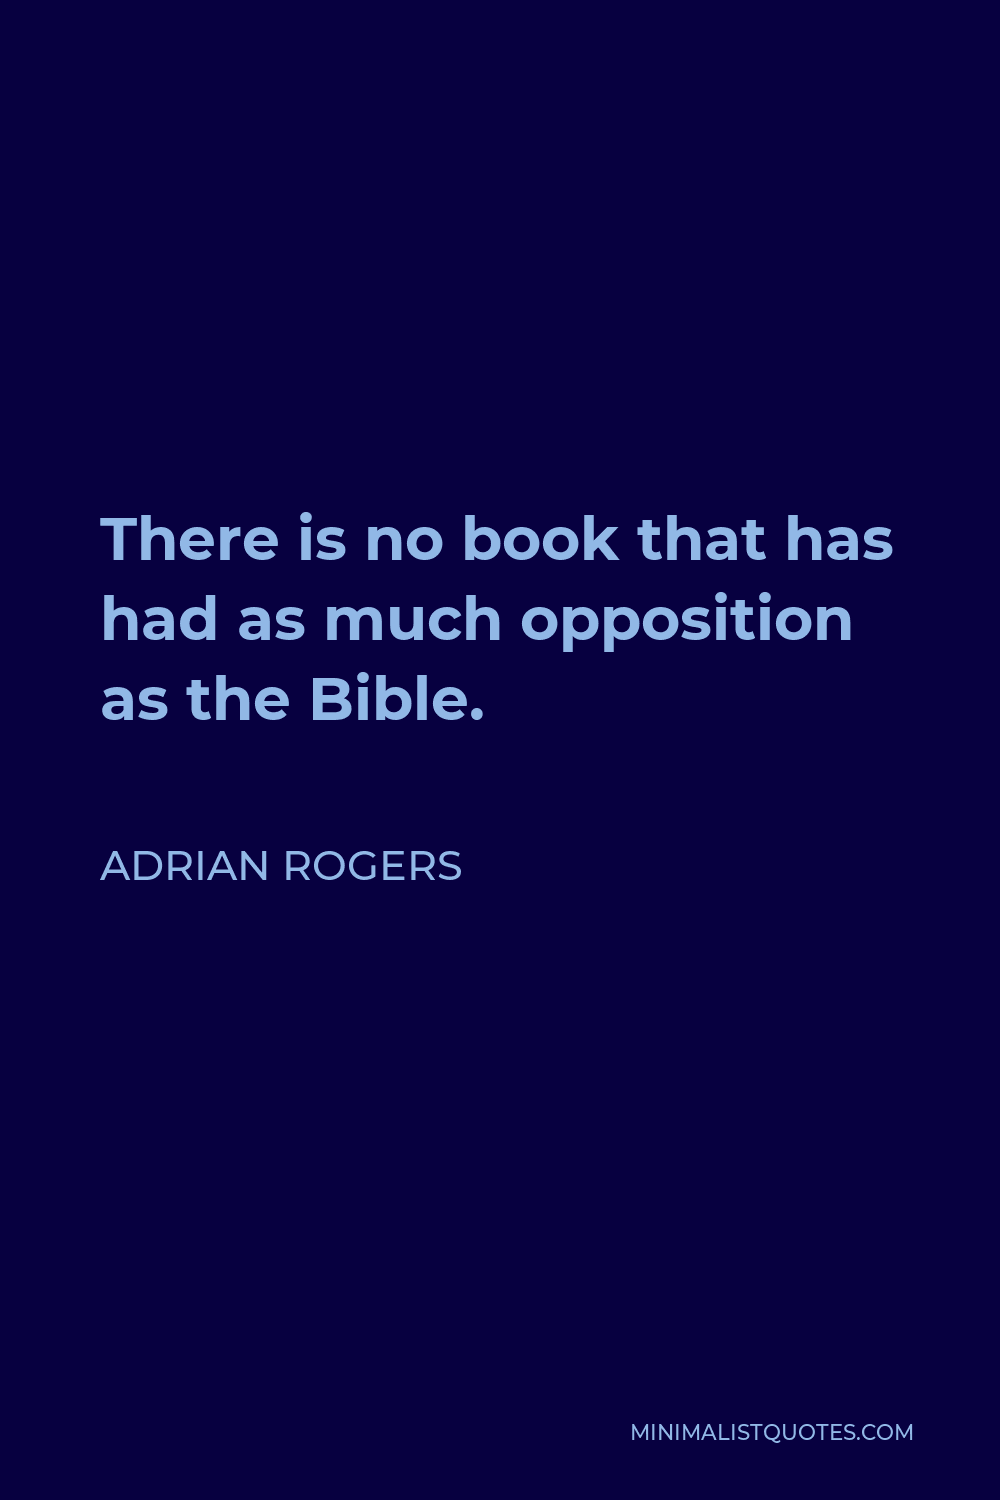 Adrian Rogers Quote - There is no book that has had as much opposition as the Bible.